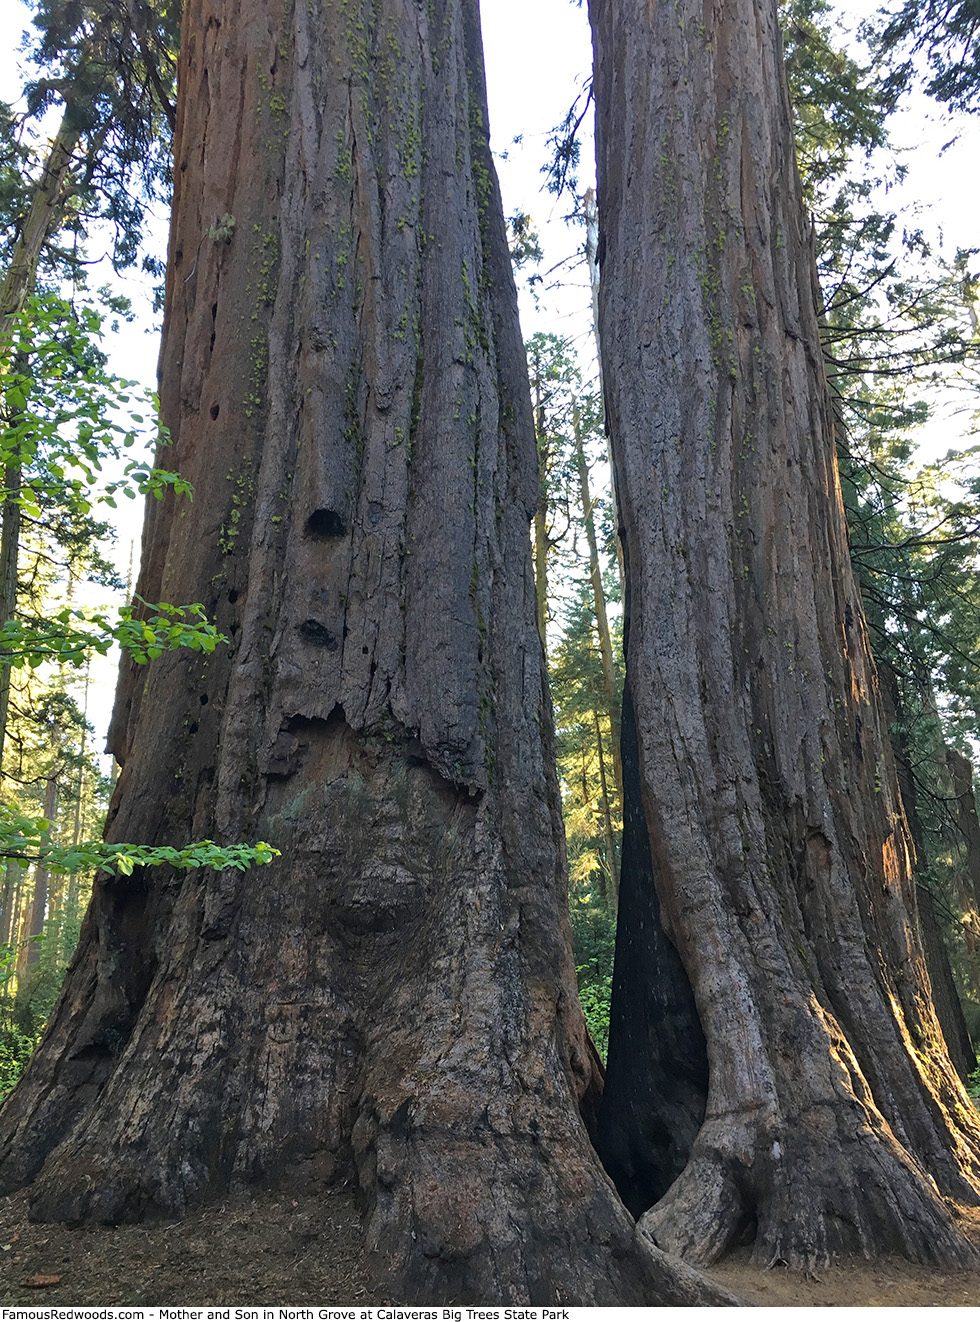 Calaveras Big Trees State Park - Mother and Son Trees